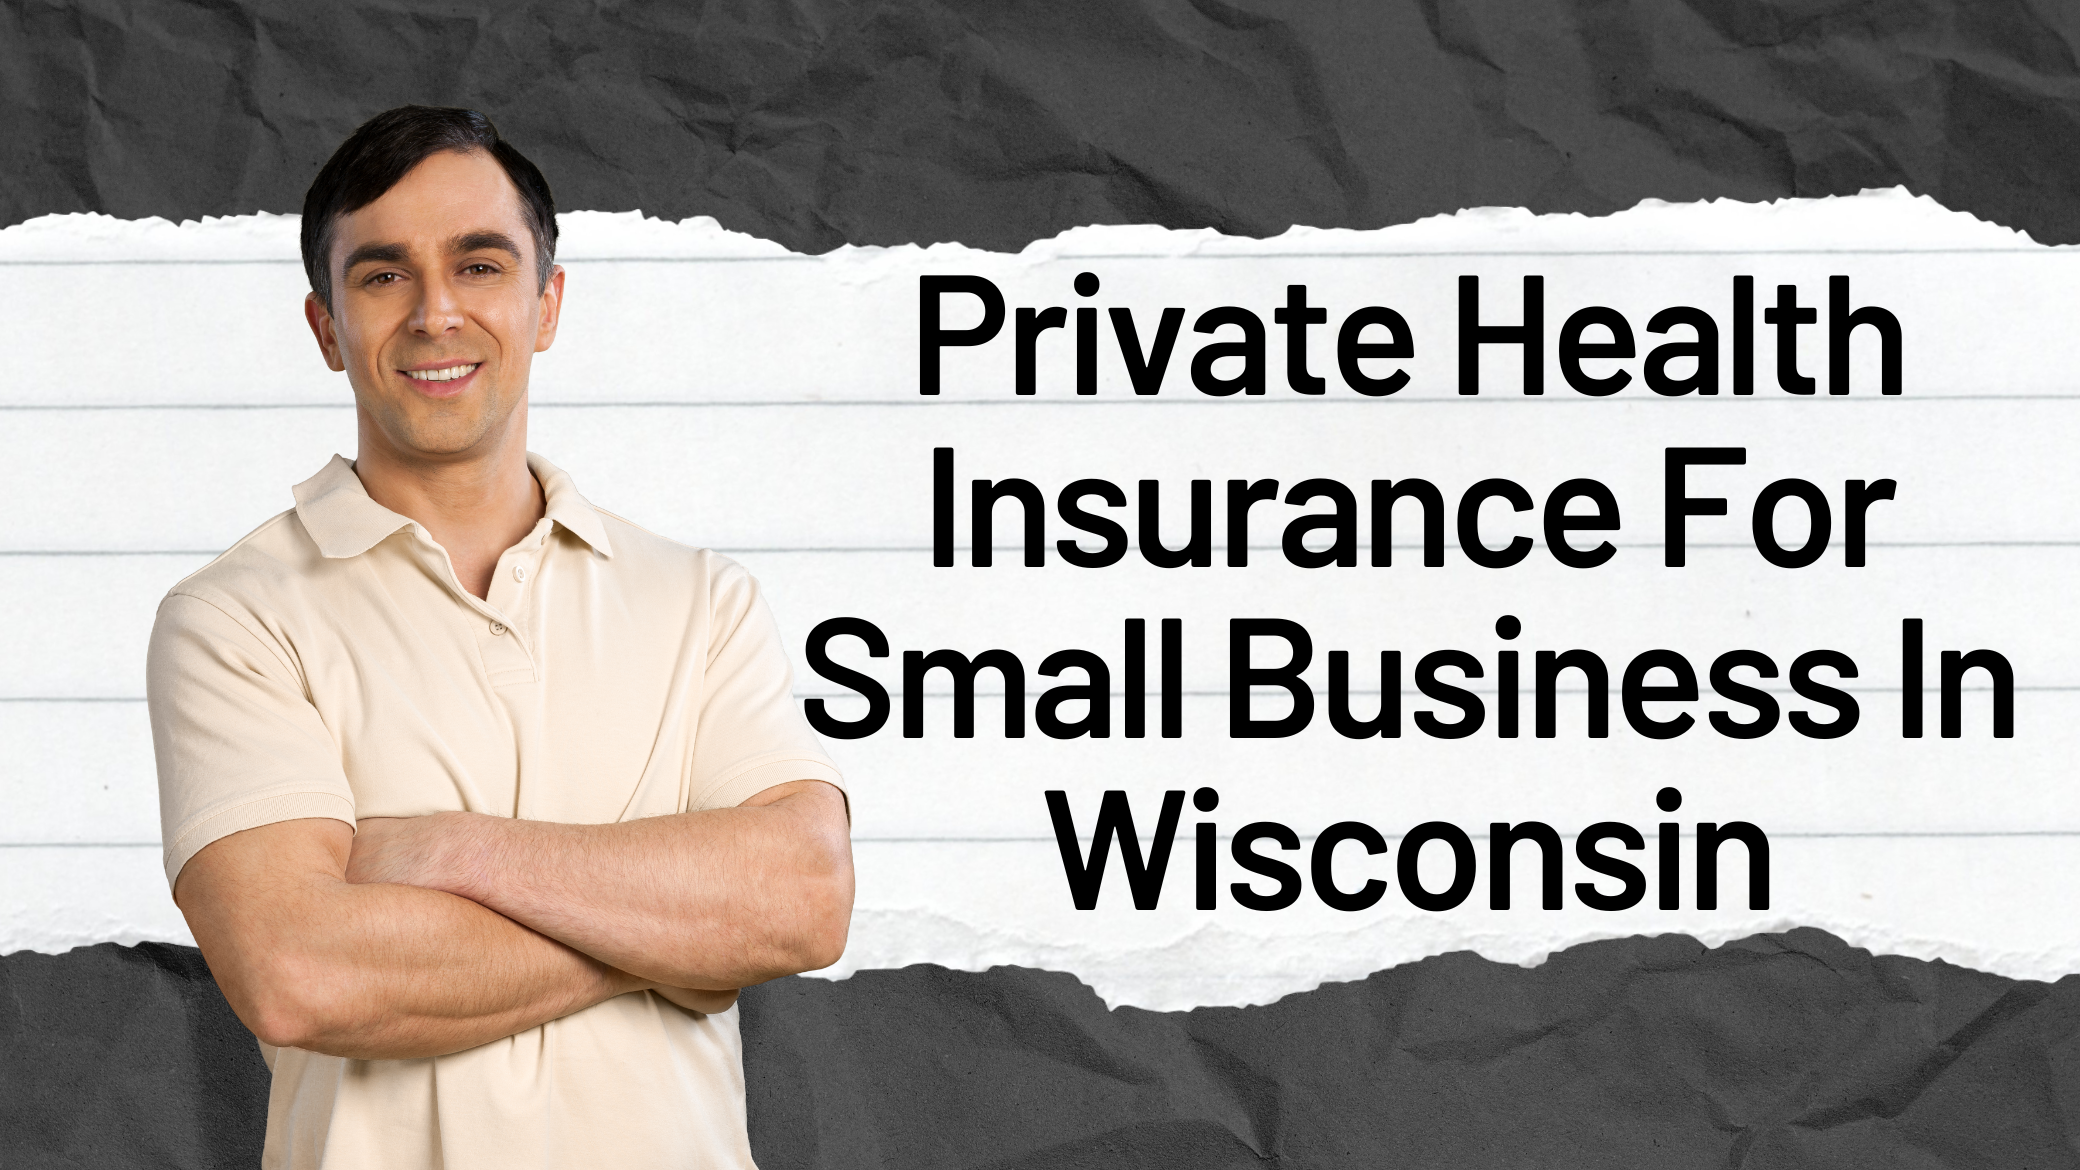 Private Health Insurance For Small Business In Wisconsin